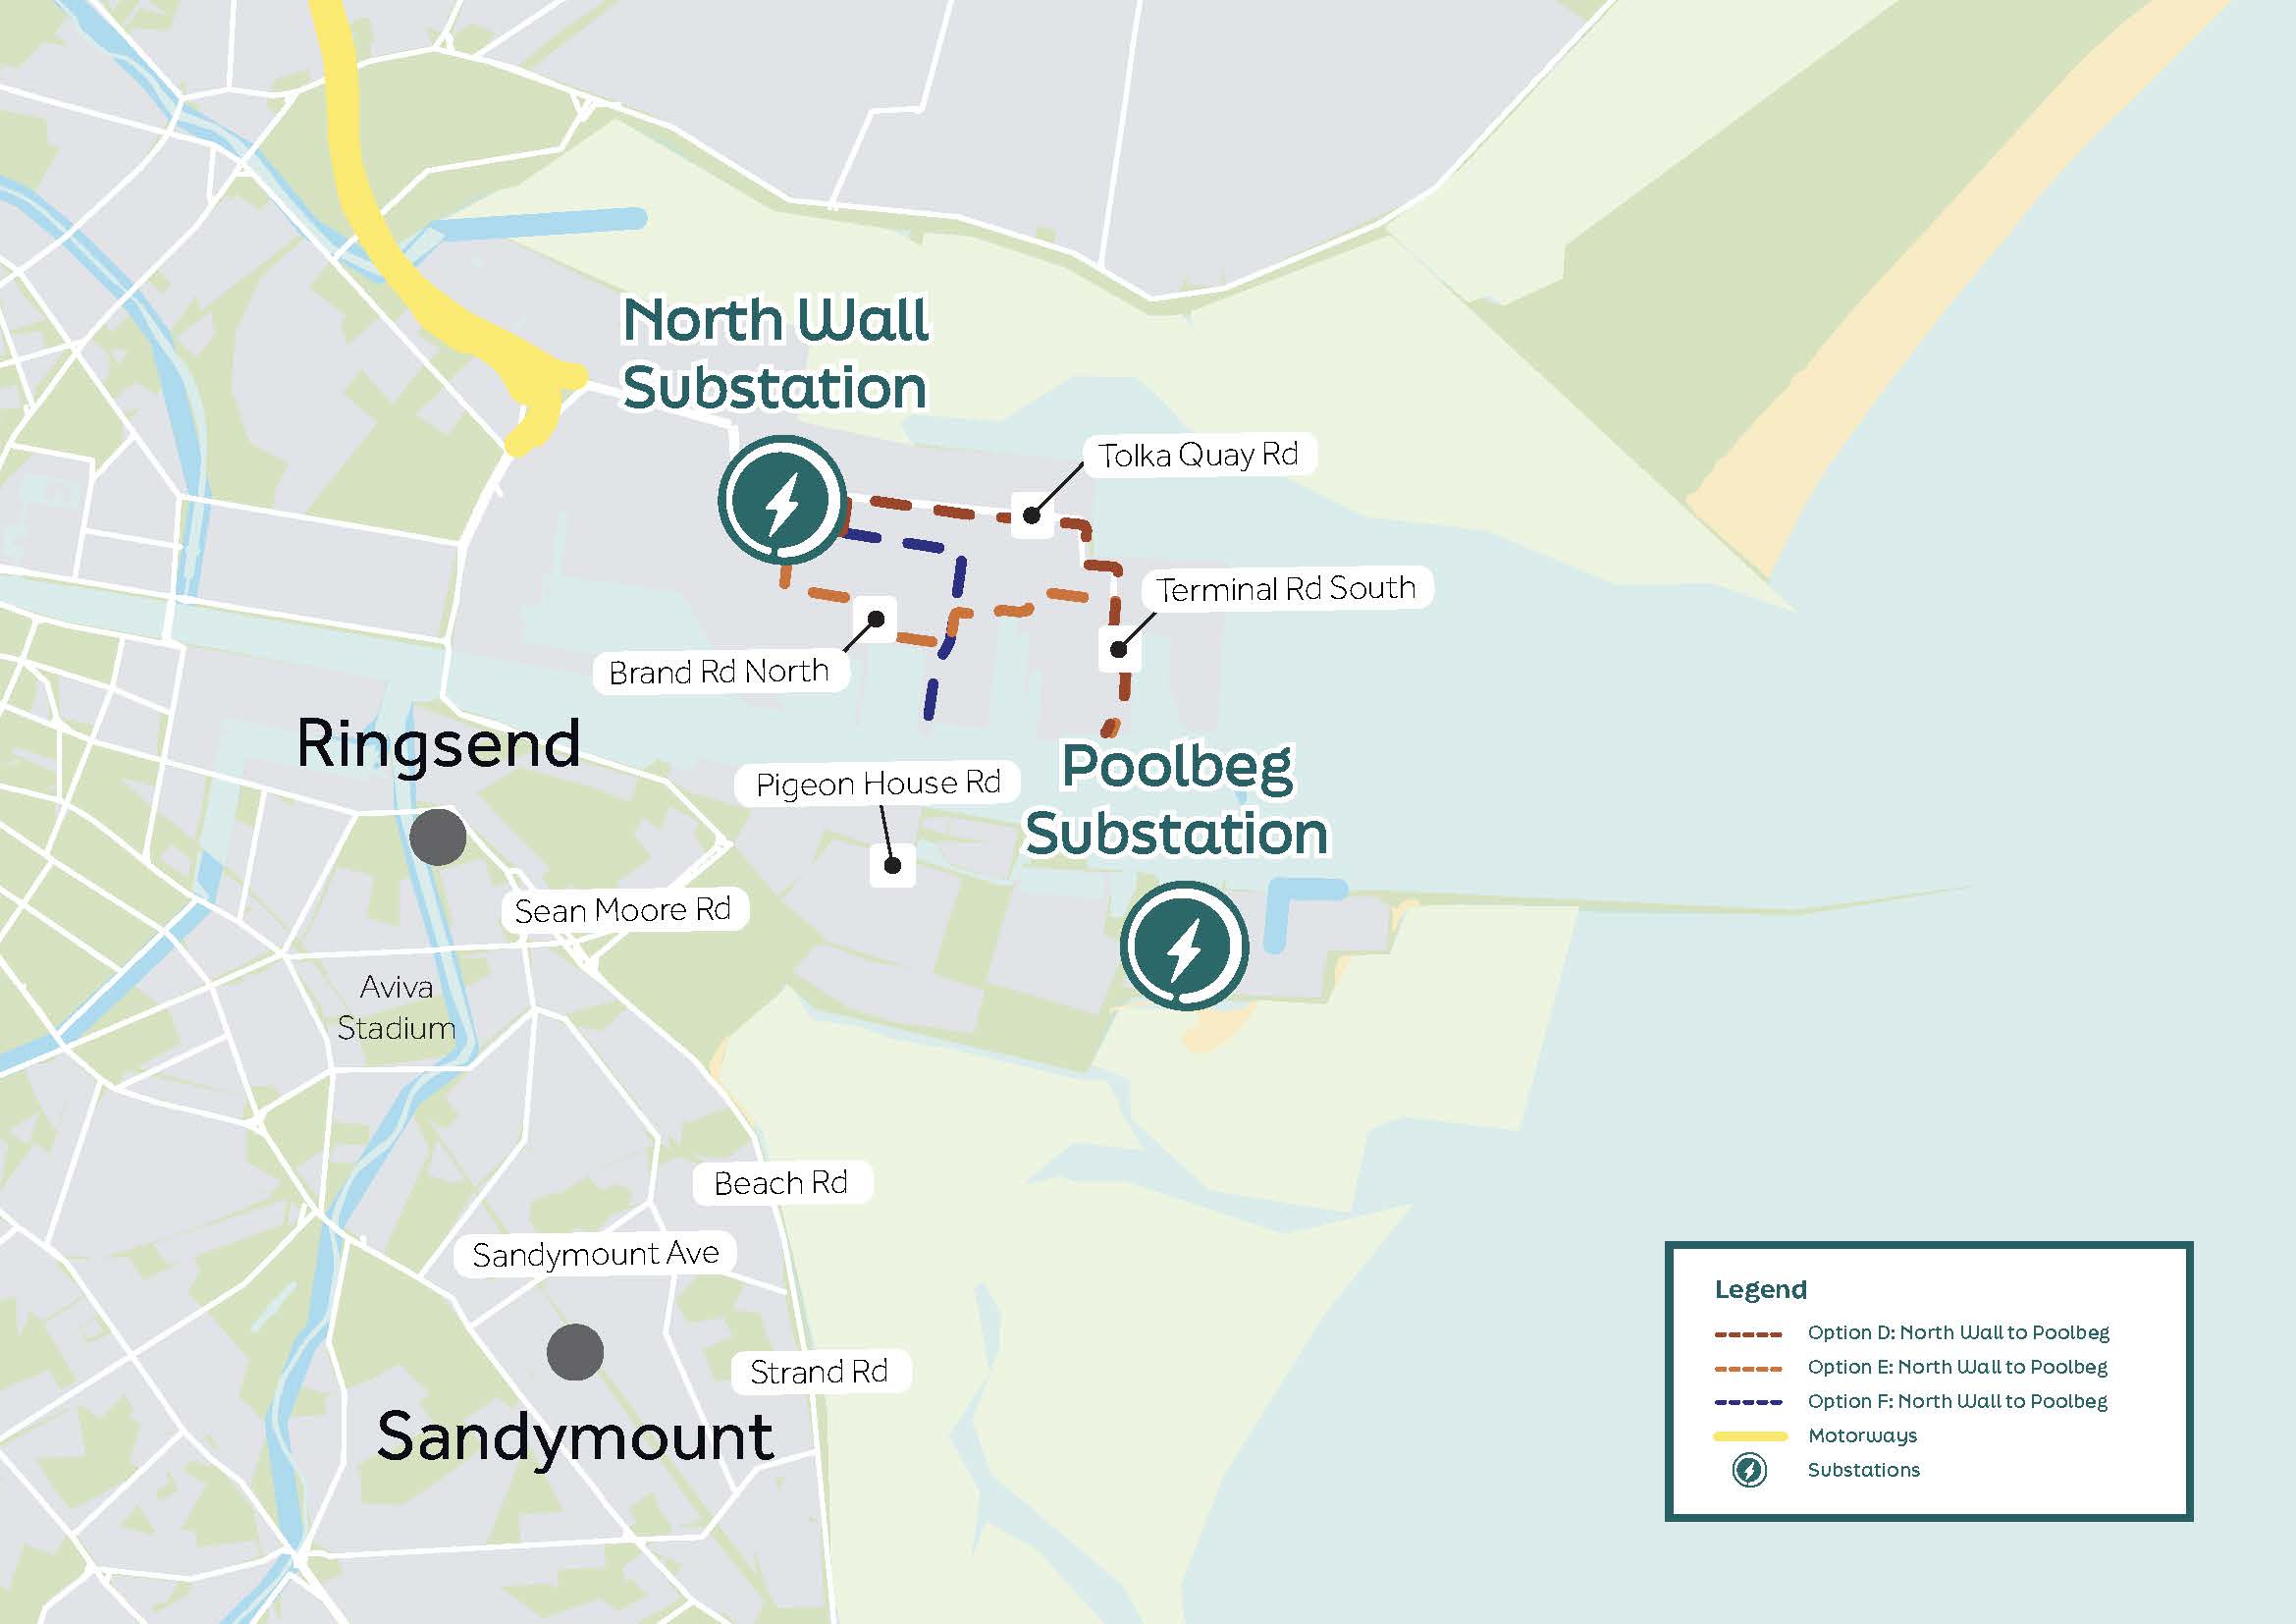 Map of North Wall Ringsend and Sandmount route options